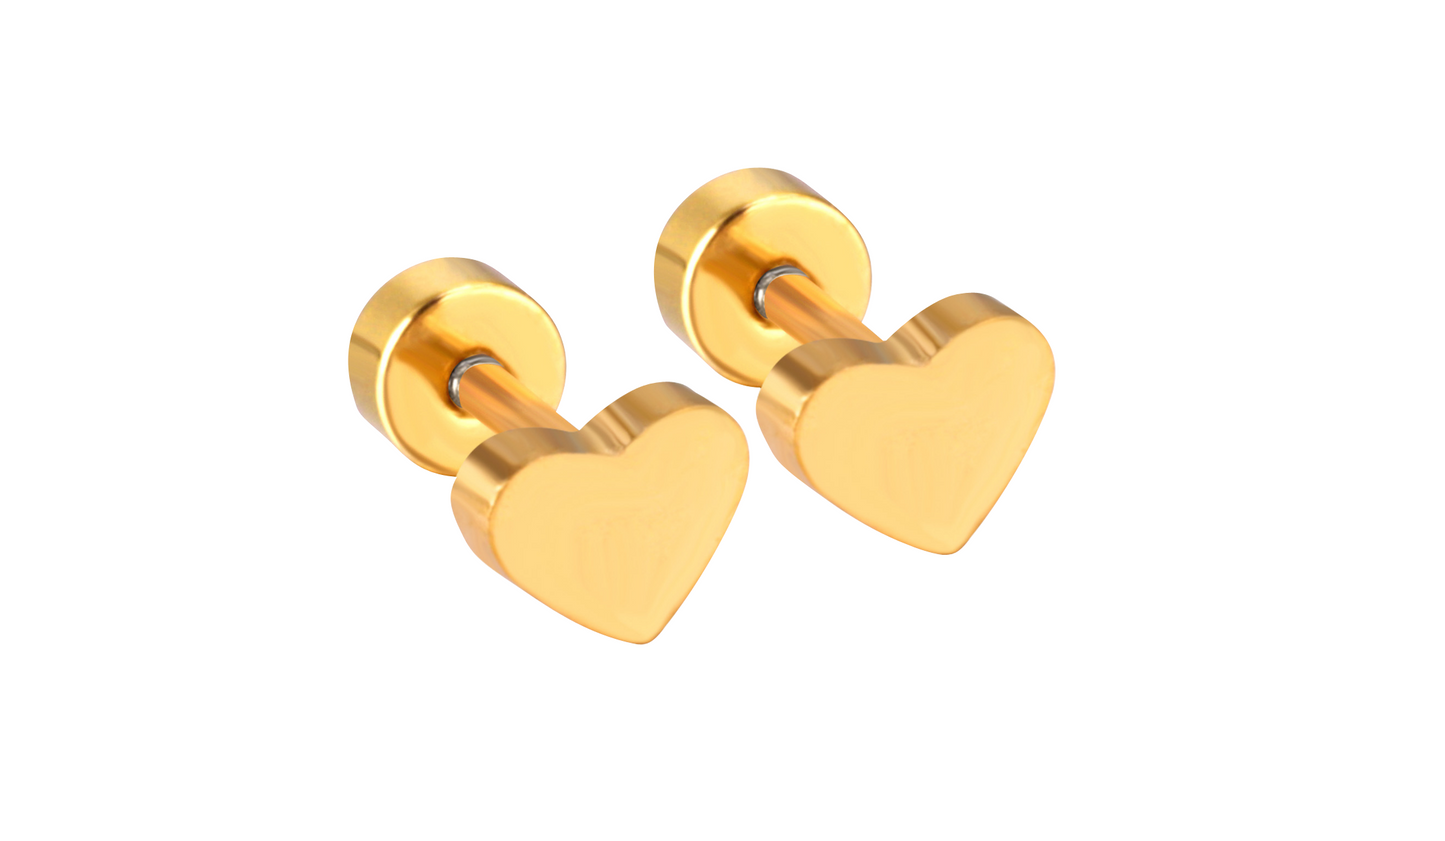 Children's Earrings:  Surgical Steel Polished Hearts with Screw Backs